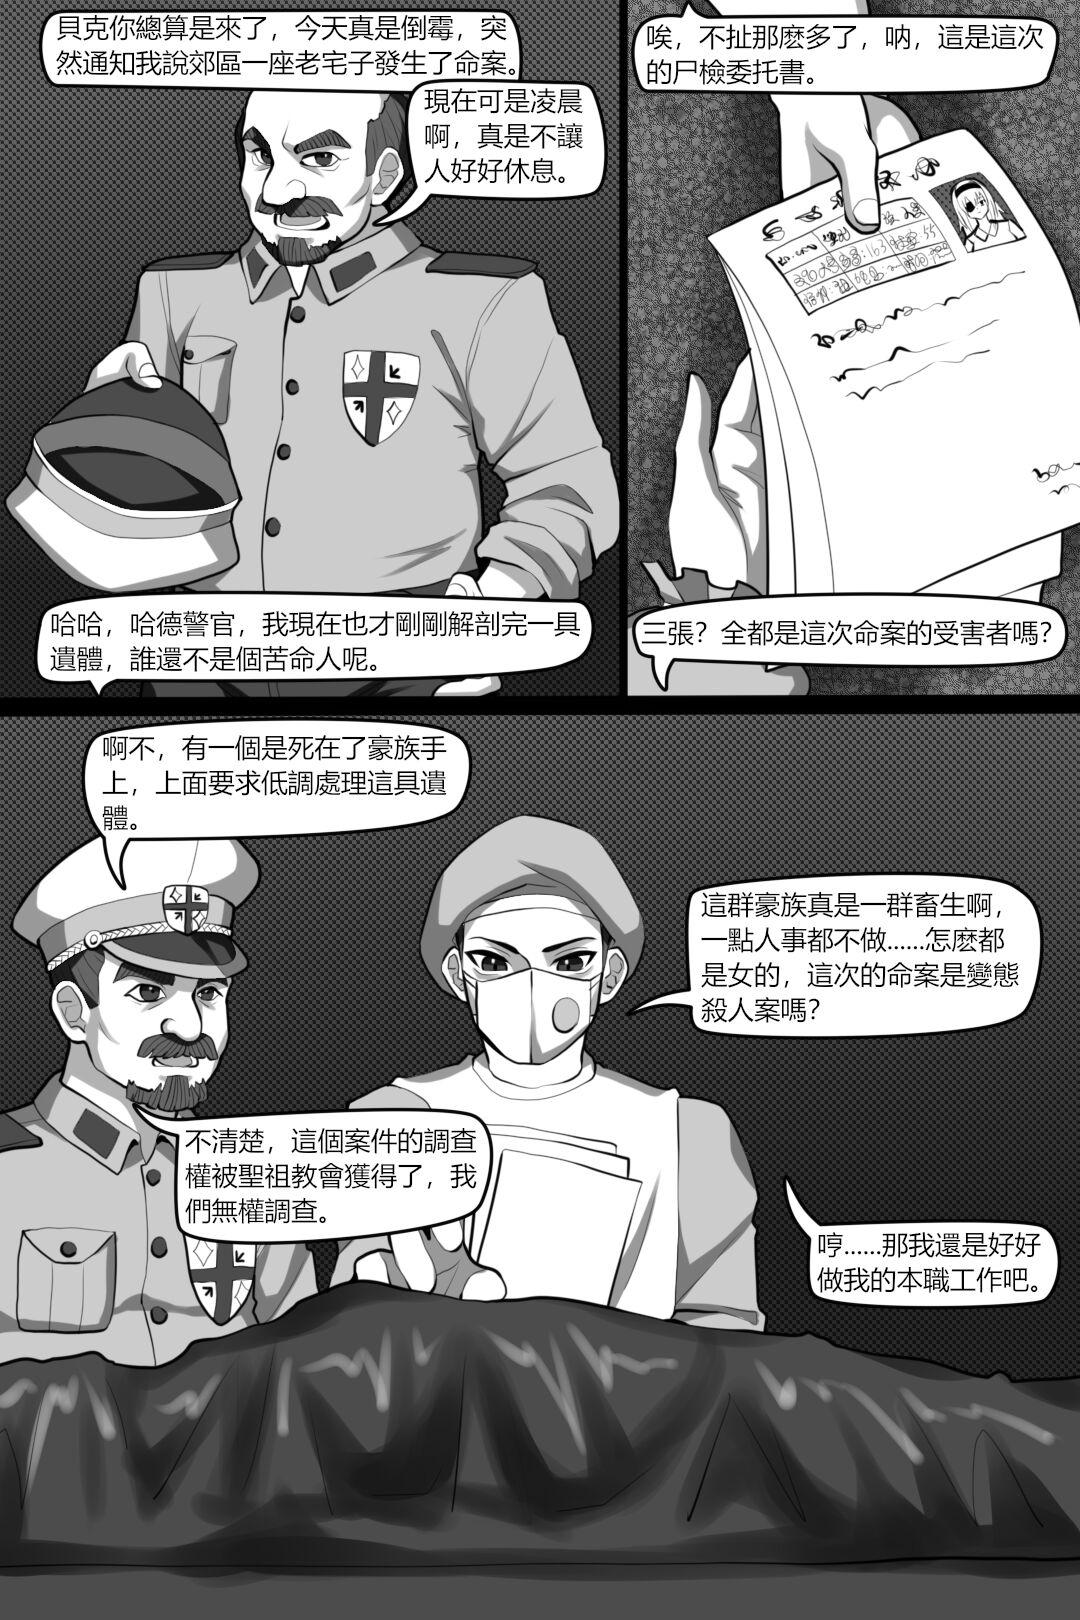 British Bin Lian City Stories Chapter 3: Corrupted Forensic - Original Hardsex - Page 8